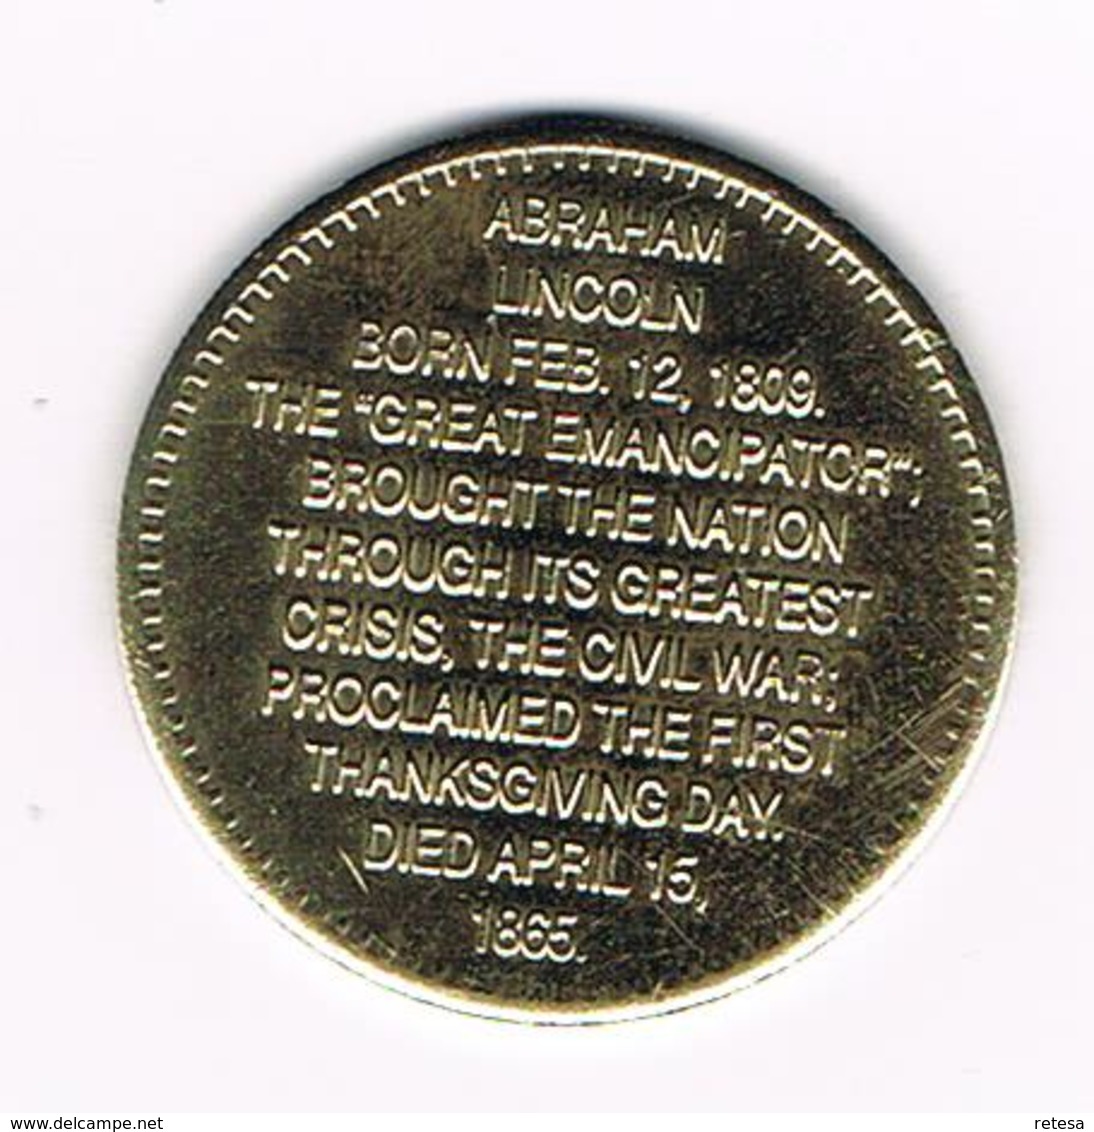 &  PENNING  ABRAHAM LINCOLN  16 TH.  PRESIDENT  U.S.A. - Elongated Coins